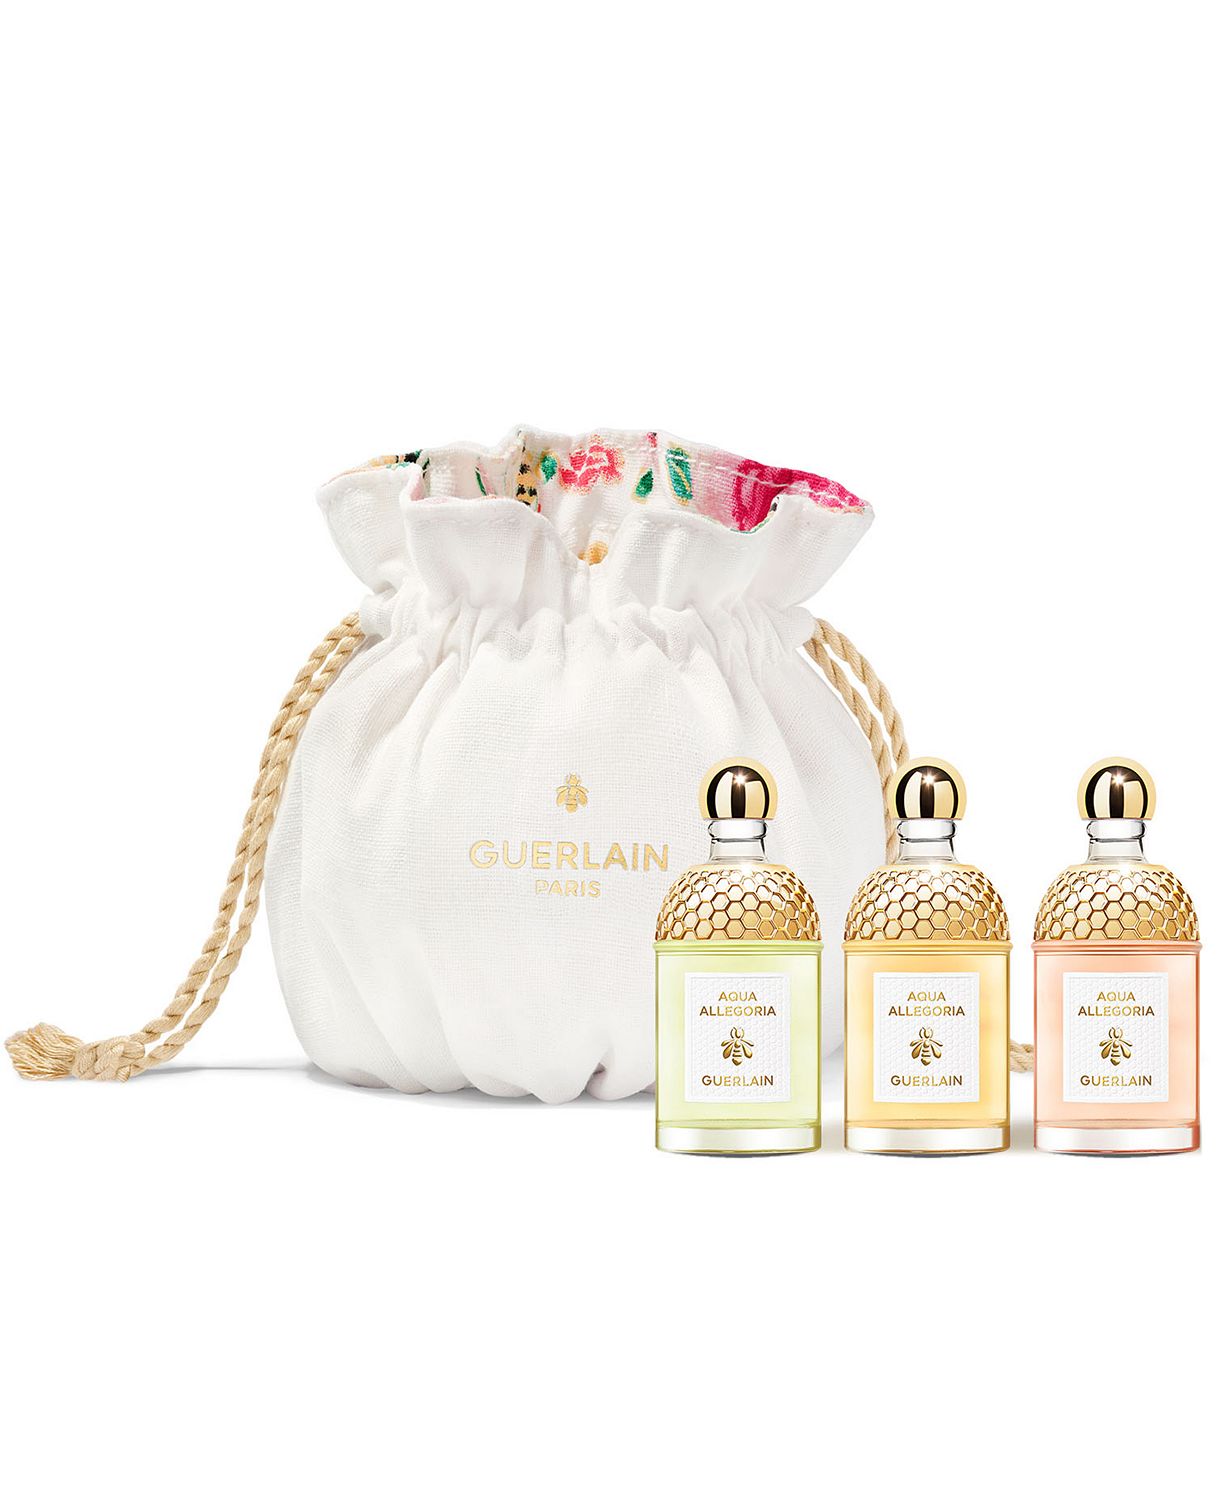 FREE Aqua Allegoria 4-Pc. gift with $150 purchase from the Guerlain fragrance collection